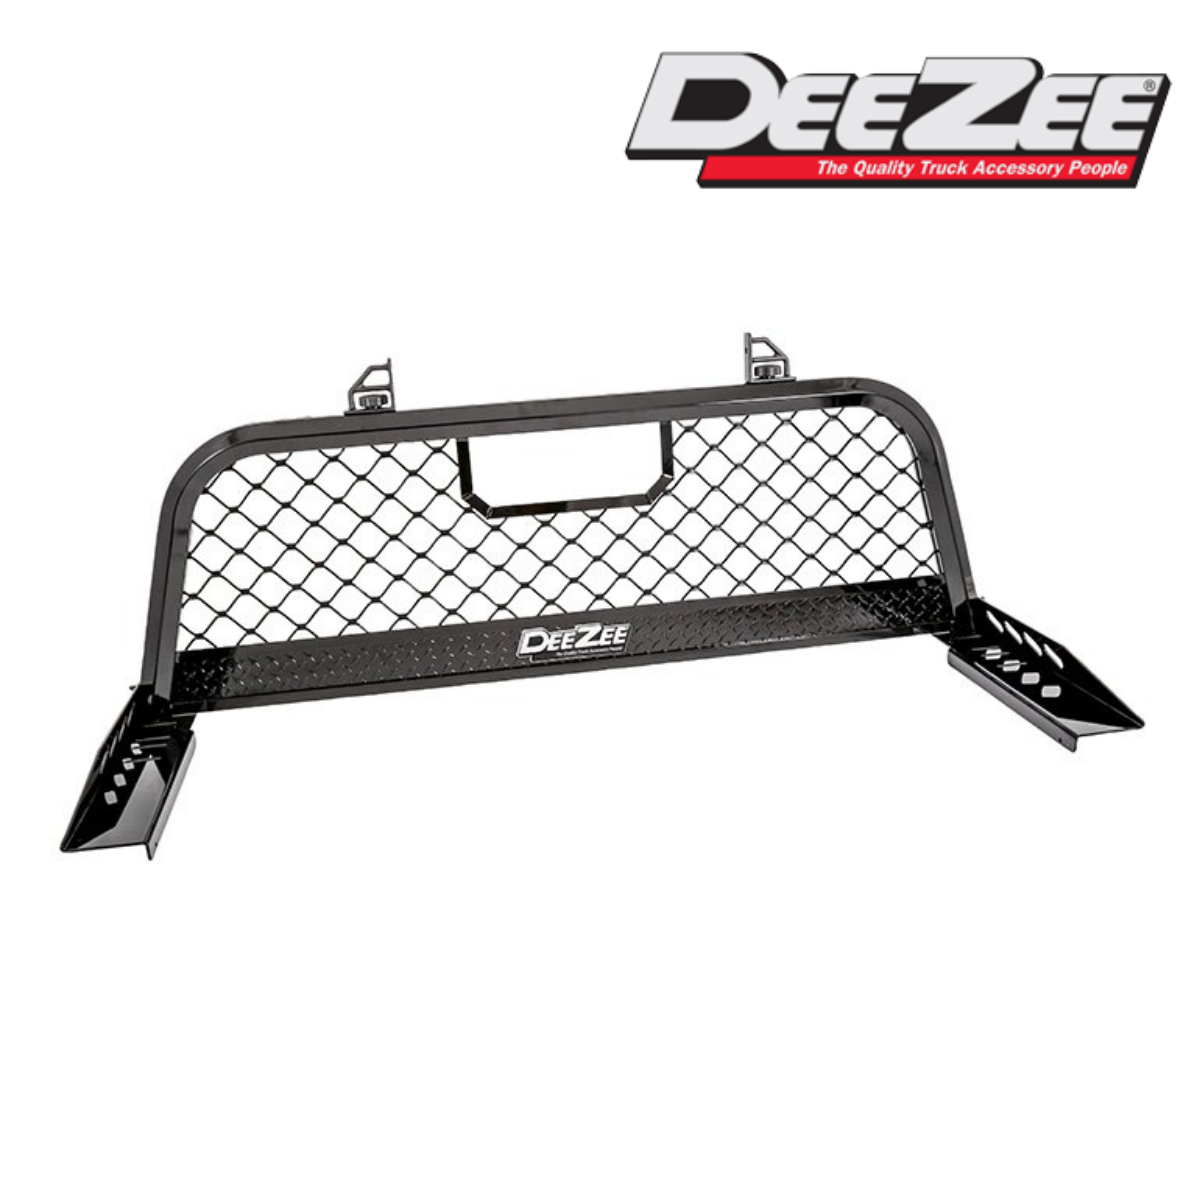 Protect Your Ride With Dee Zee